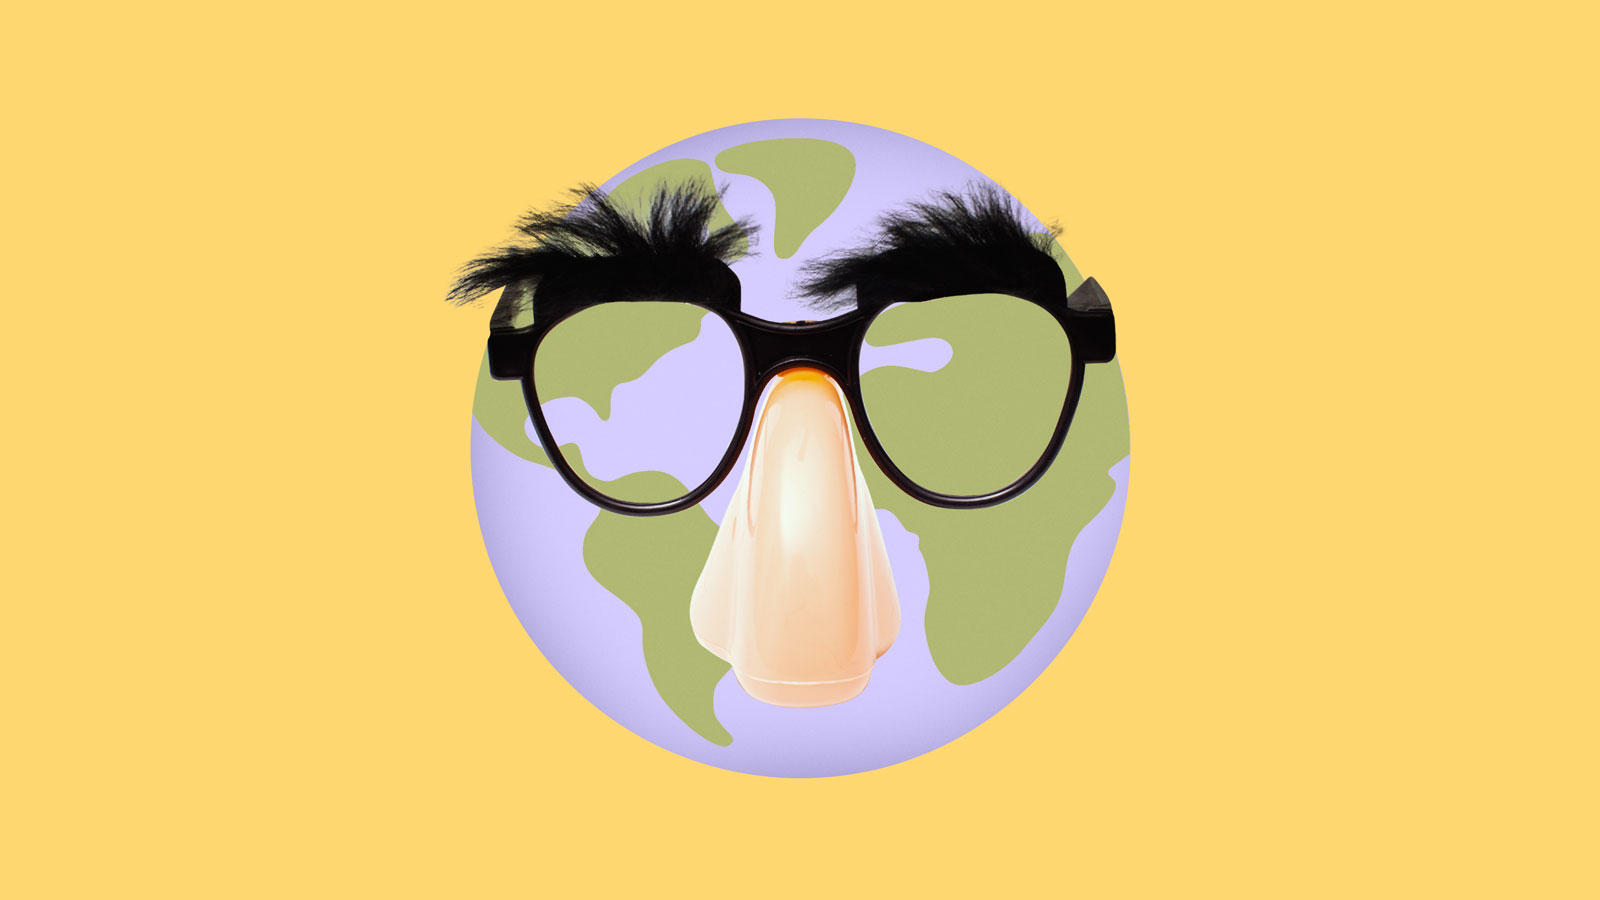 Conceptual illustration of earth wearing Groucho glasses